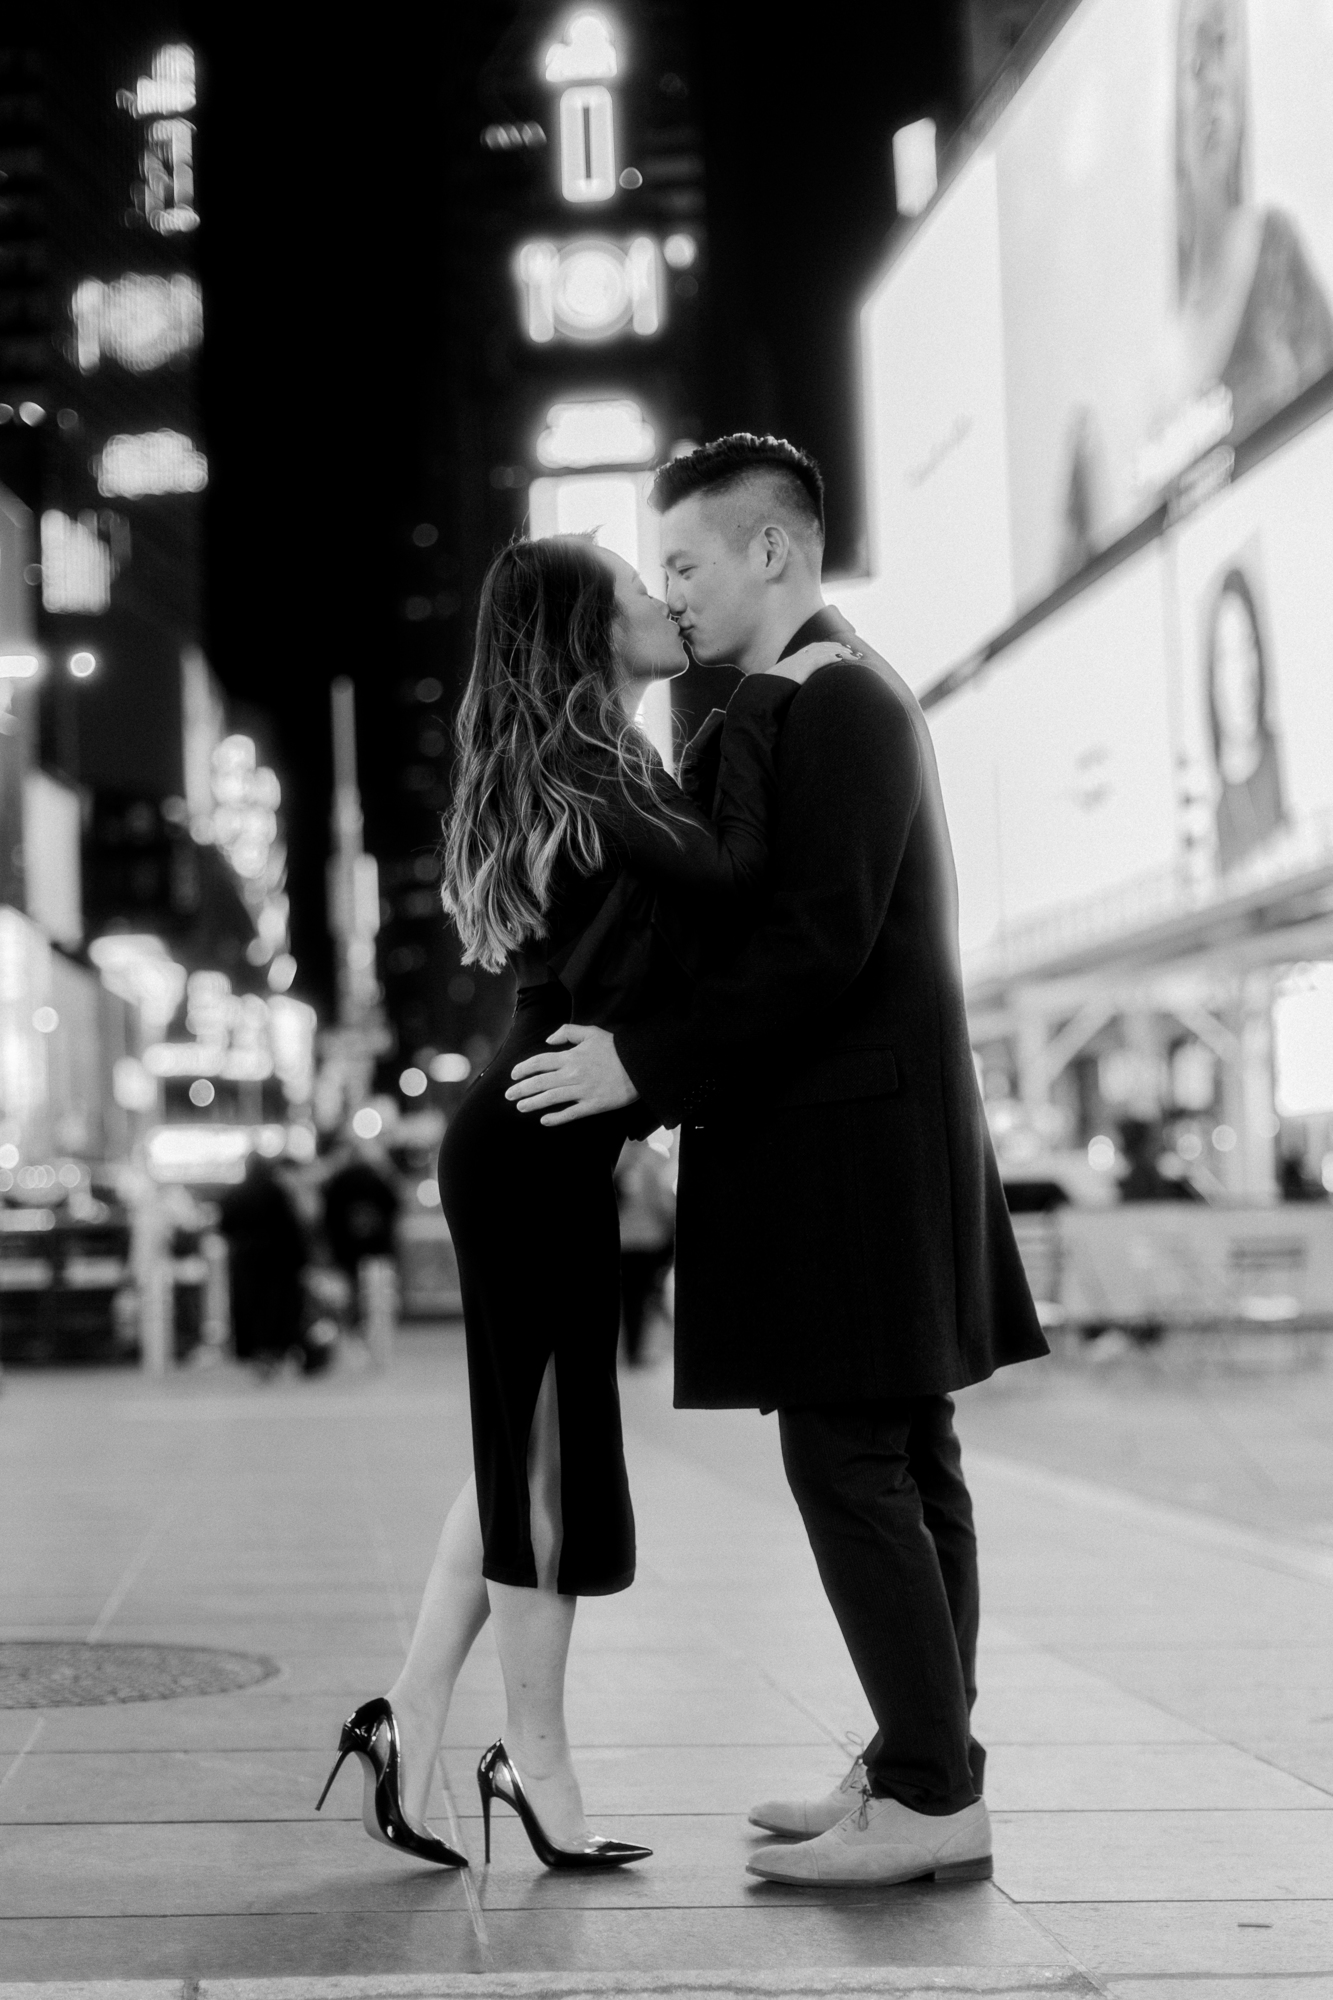 Elegant Nighttime Winter Engagement Photos in New York's Iconic Times Square